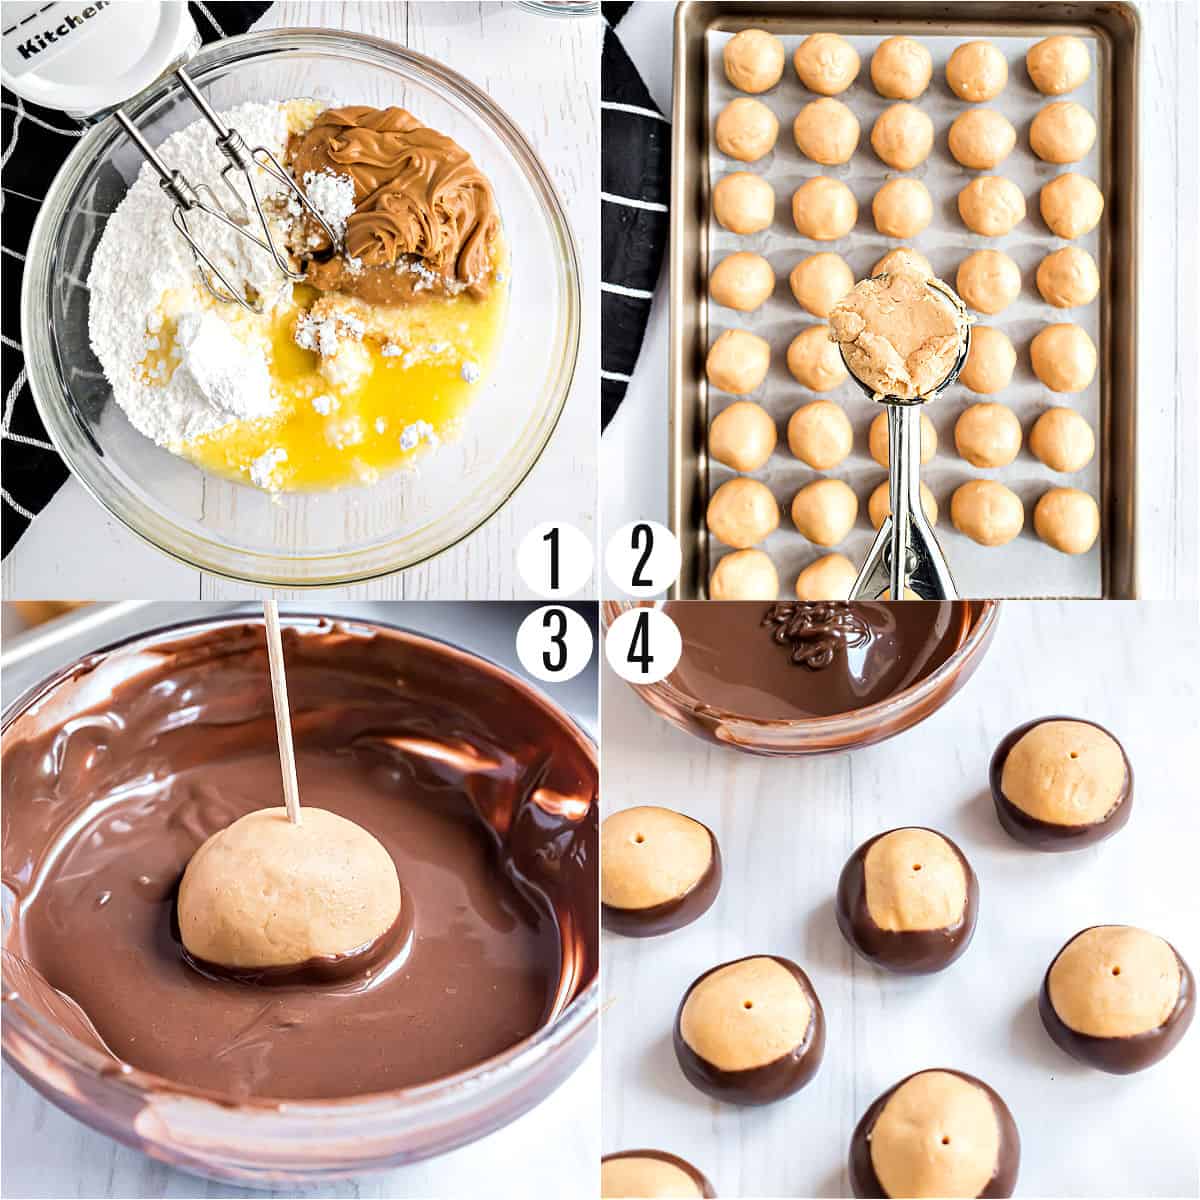 Step by step photos showing how to make buckeyes.